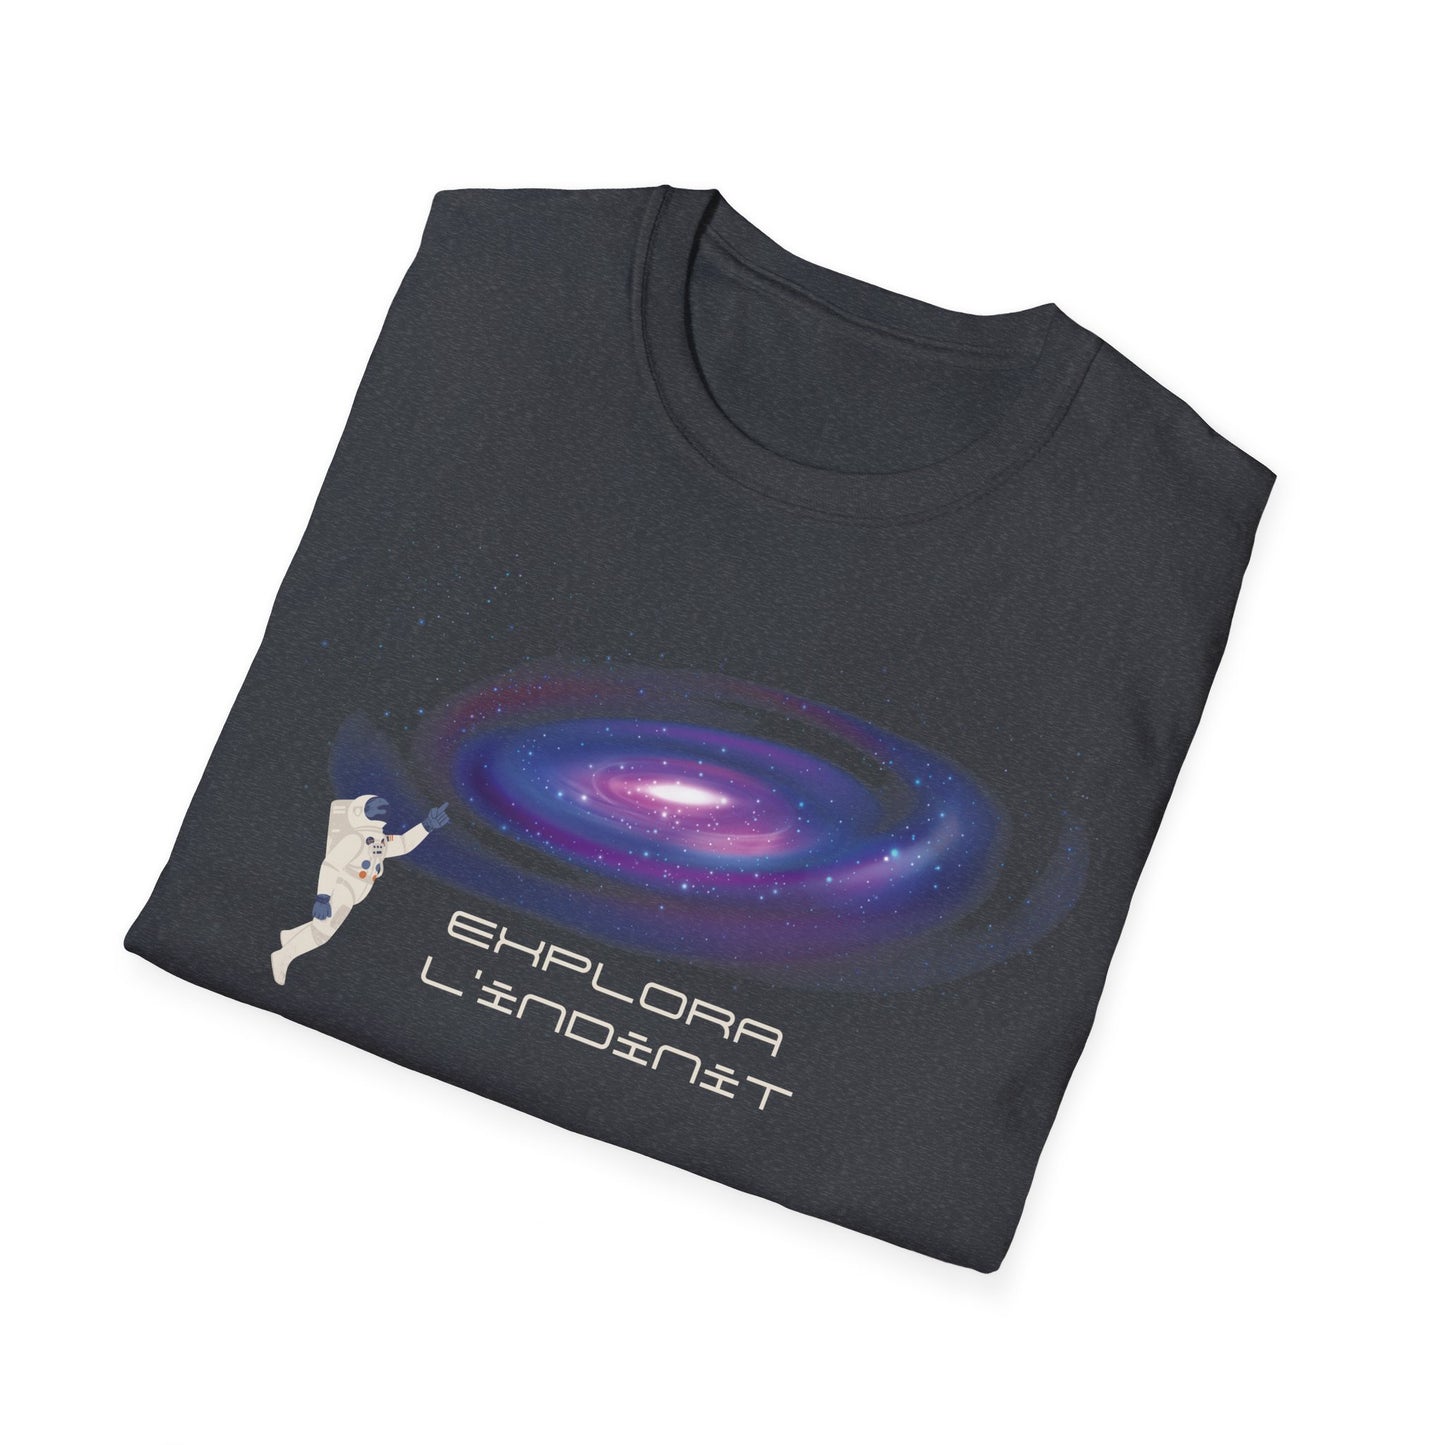 Unisex short-sleeved t-shirt, with a phrase in Catalan about the solar system.